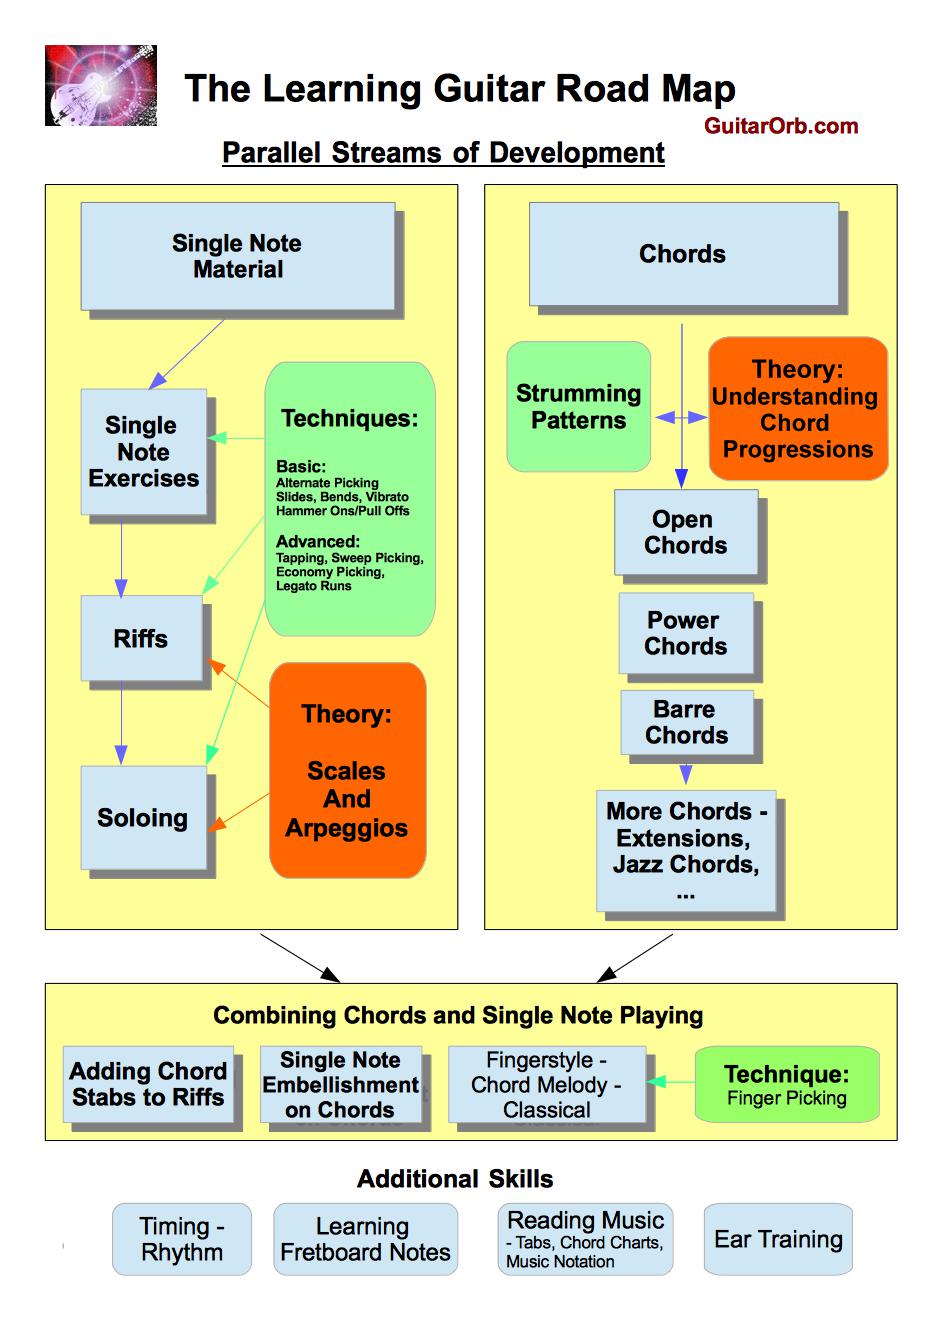 The Learning Guitar Roadmap